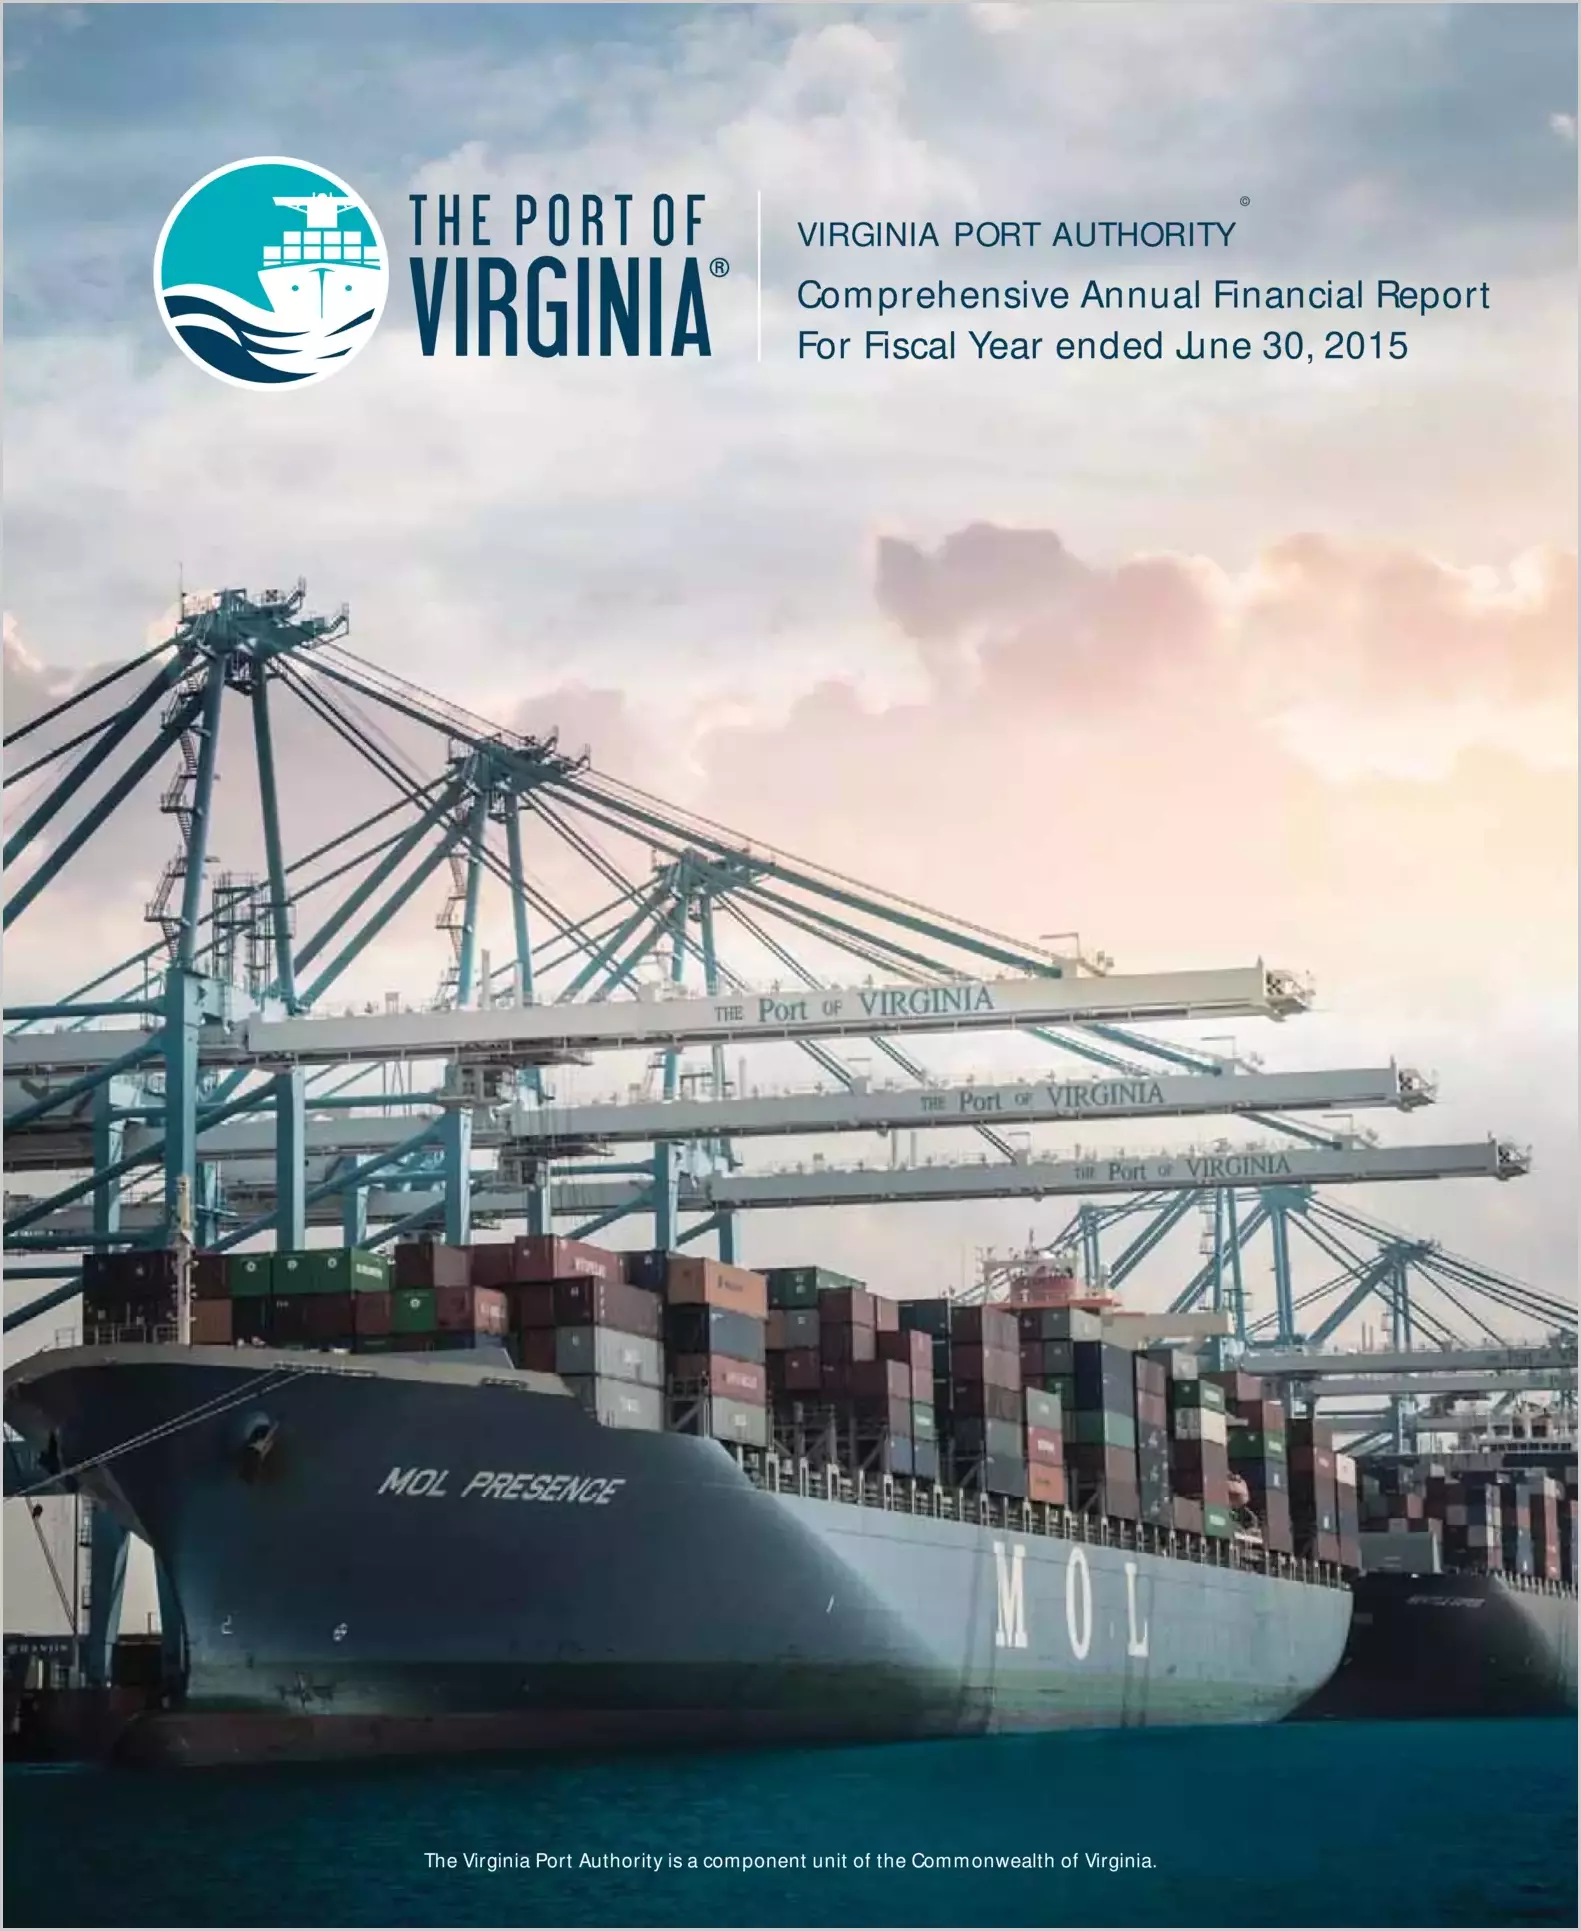 Virginia Port Authority Financial Statements Report for the year ended June 30, 2015